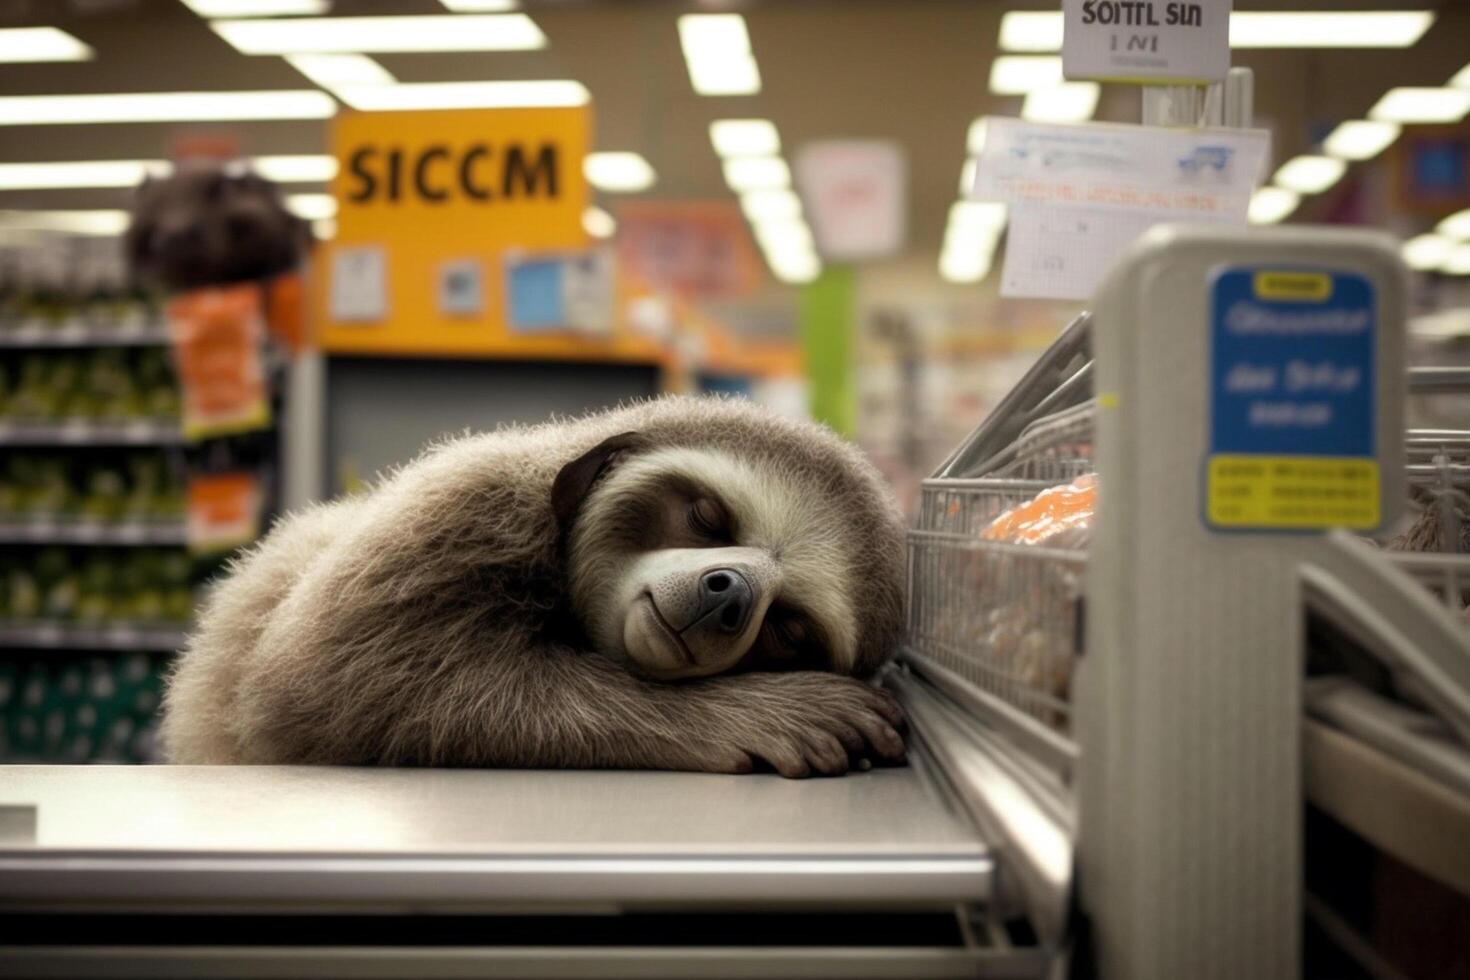 Exhausted sloth working in the supermarket as a cashier and fell asleep photo